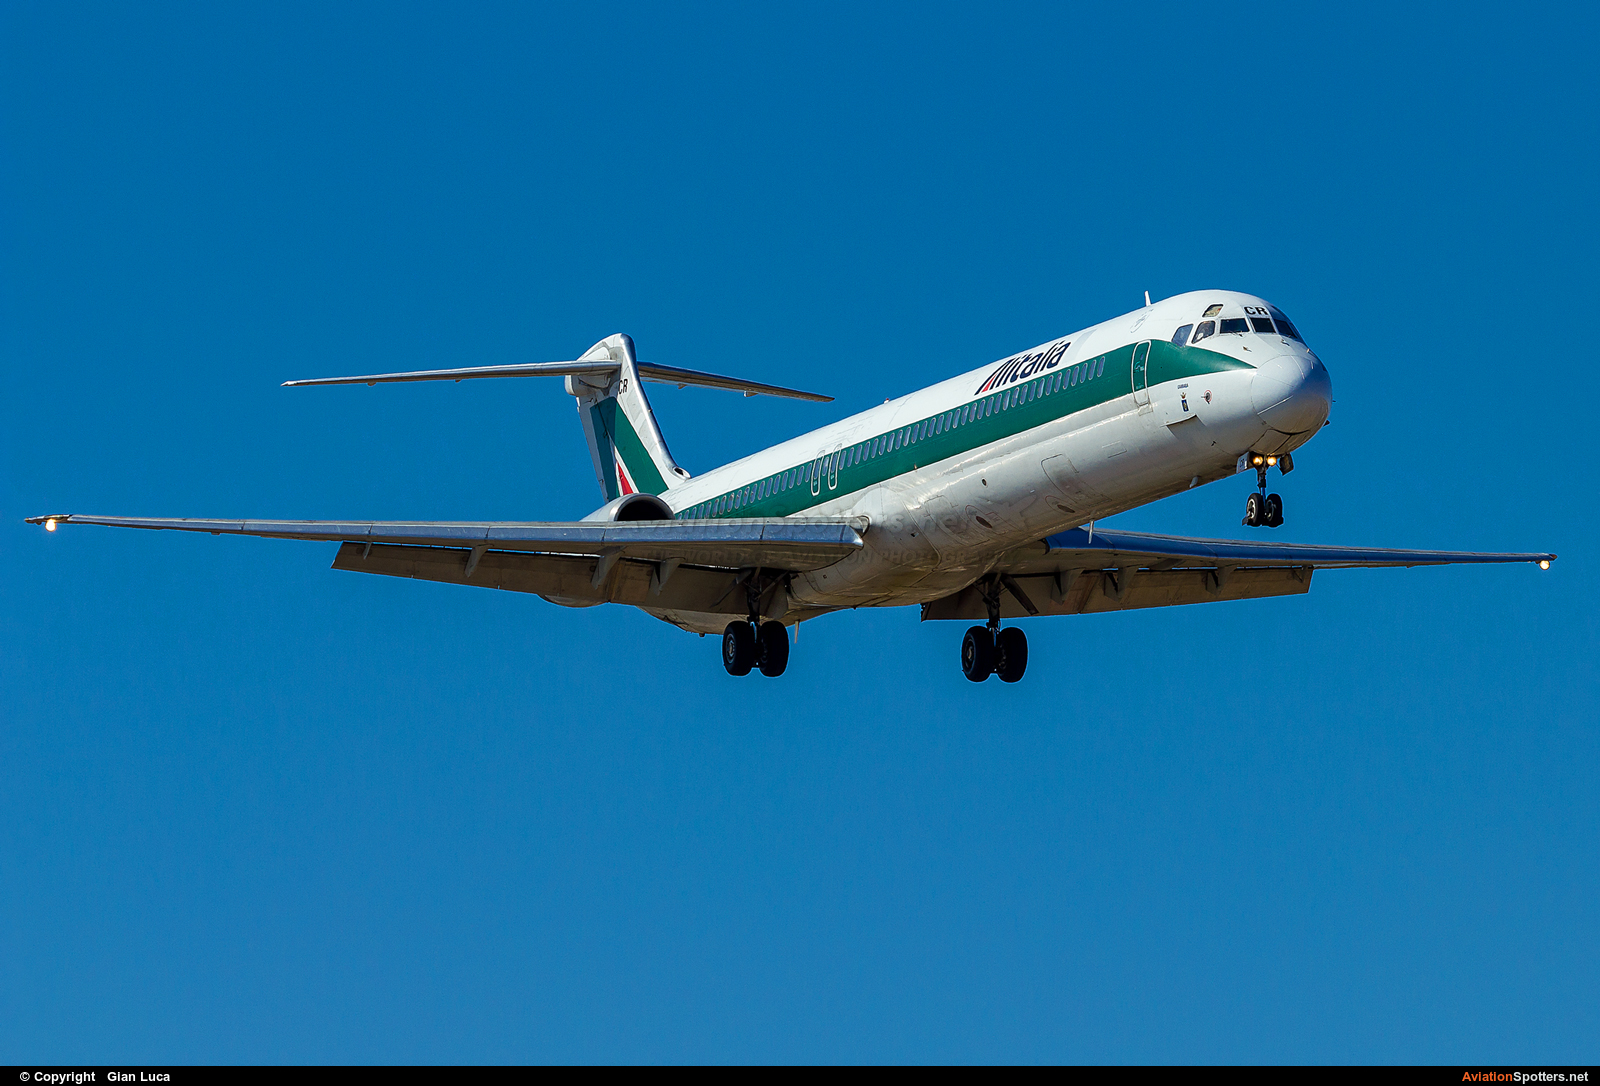 Alitalia  -  MD-82  (I-DACR) By Onnis G.Luca Sardegna Spotters (Onnis84)